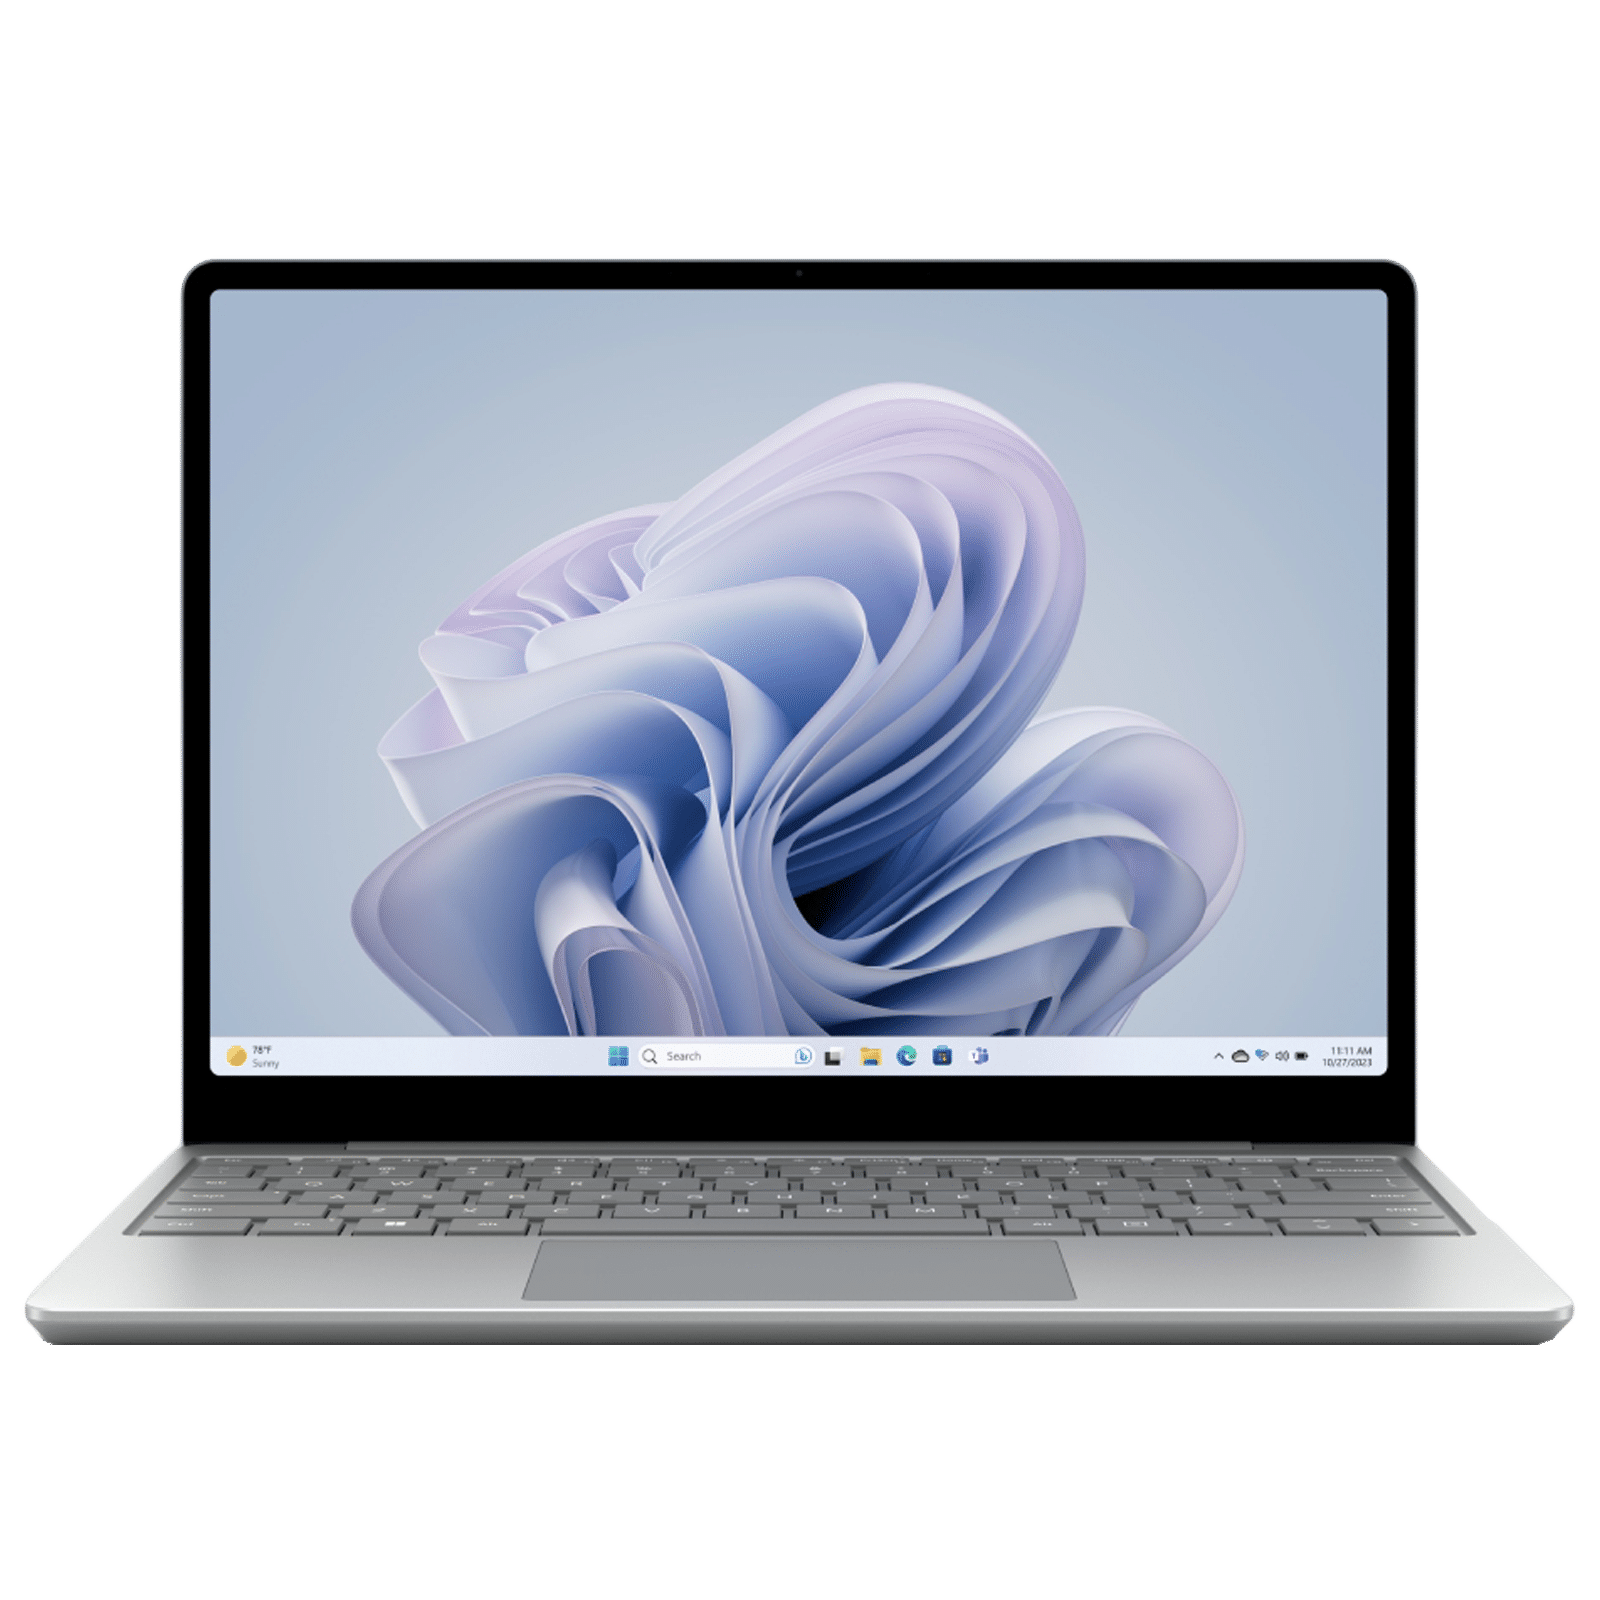 Office2021搭載！Surface Laptop 3 i5-1035G7